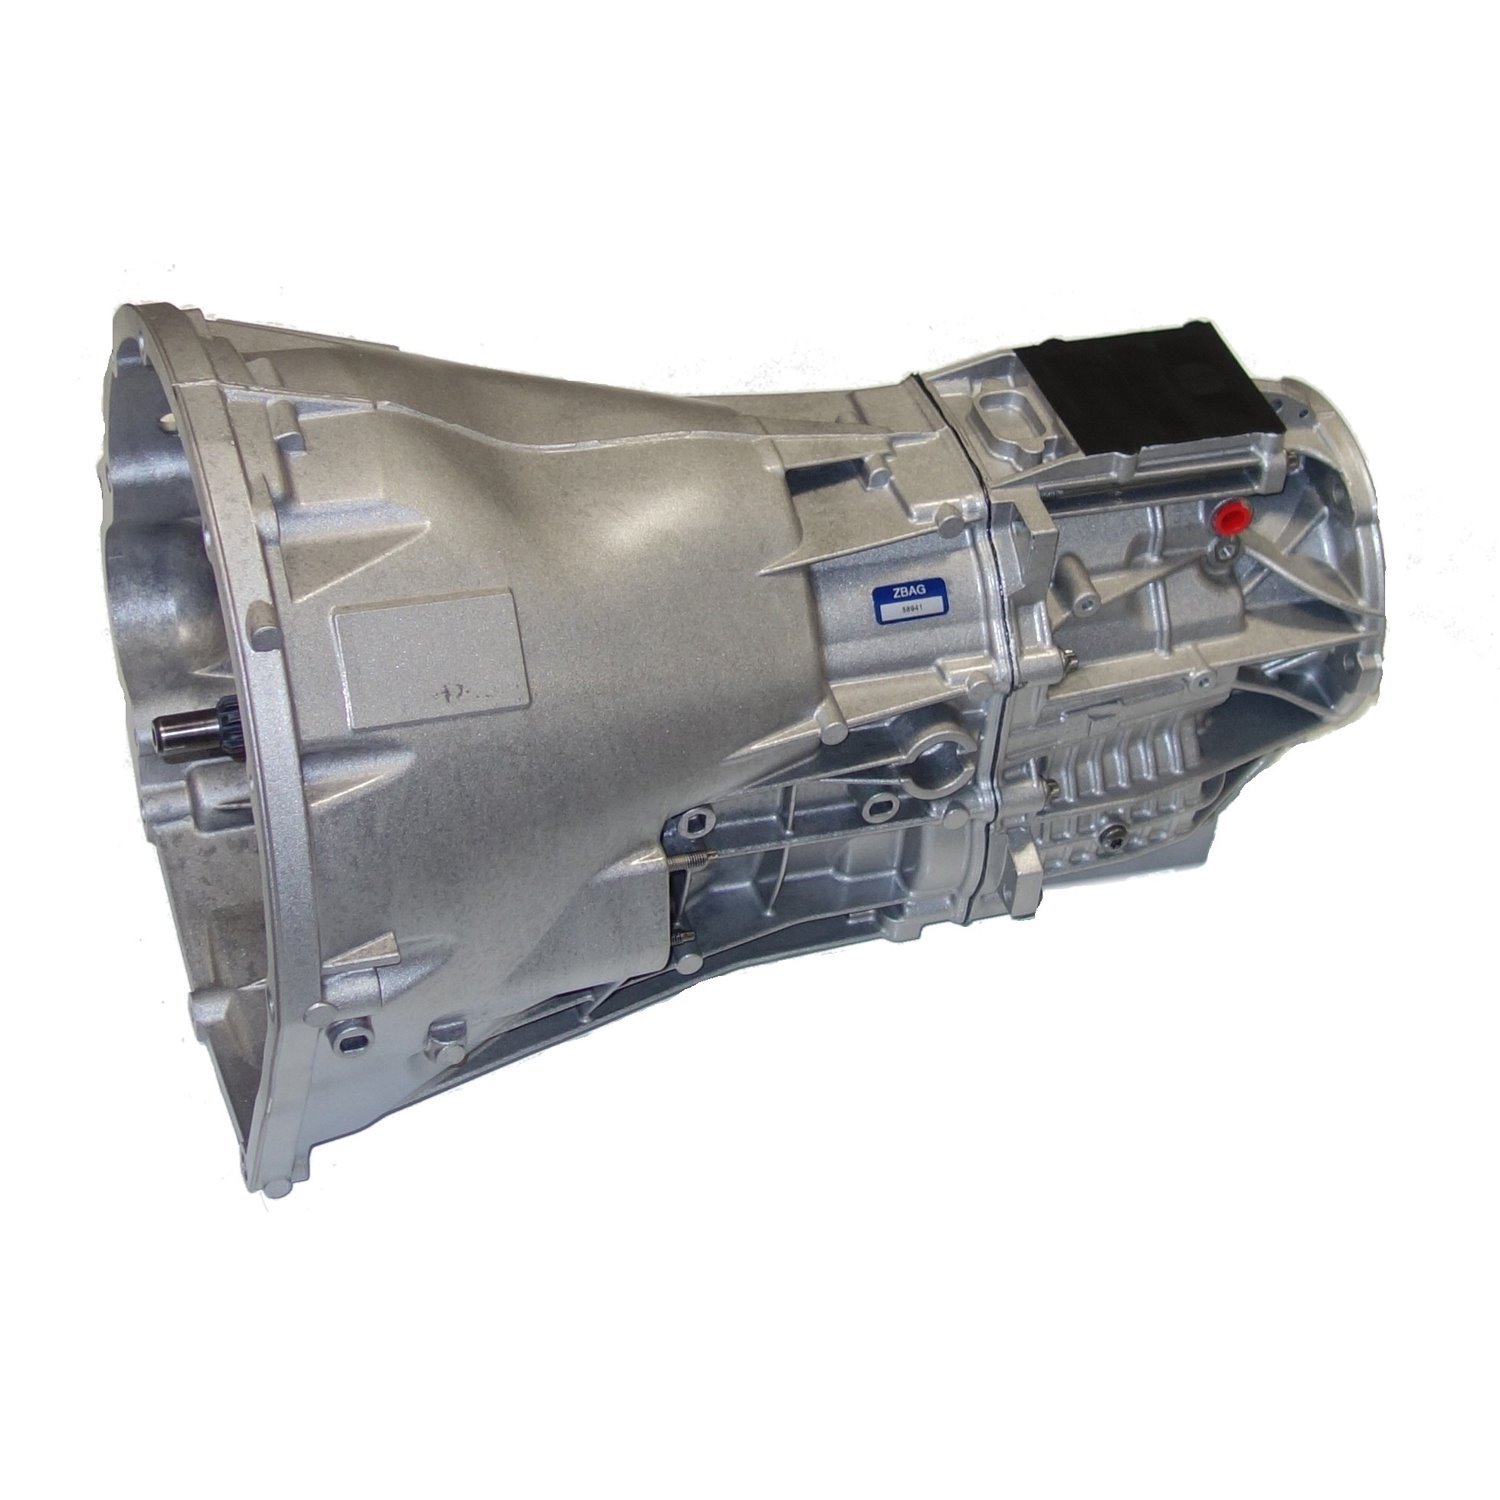 Remanufactured NSG370 Manual Transmission for Jeep 2005 Liberty 2.4L, 6 Speed, 4WD